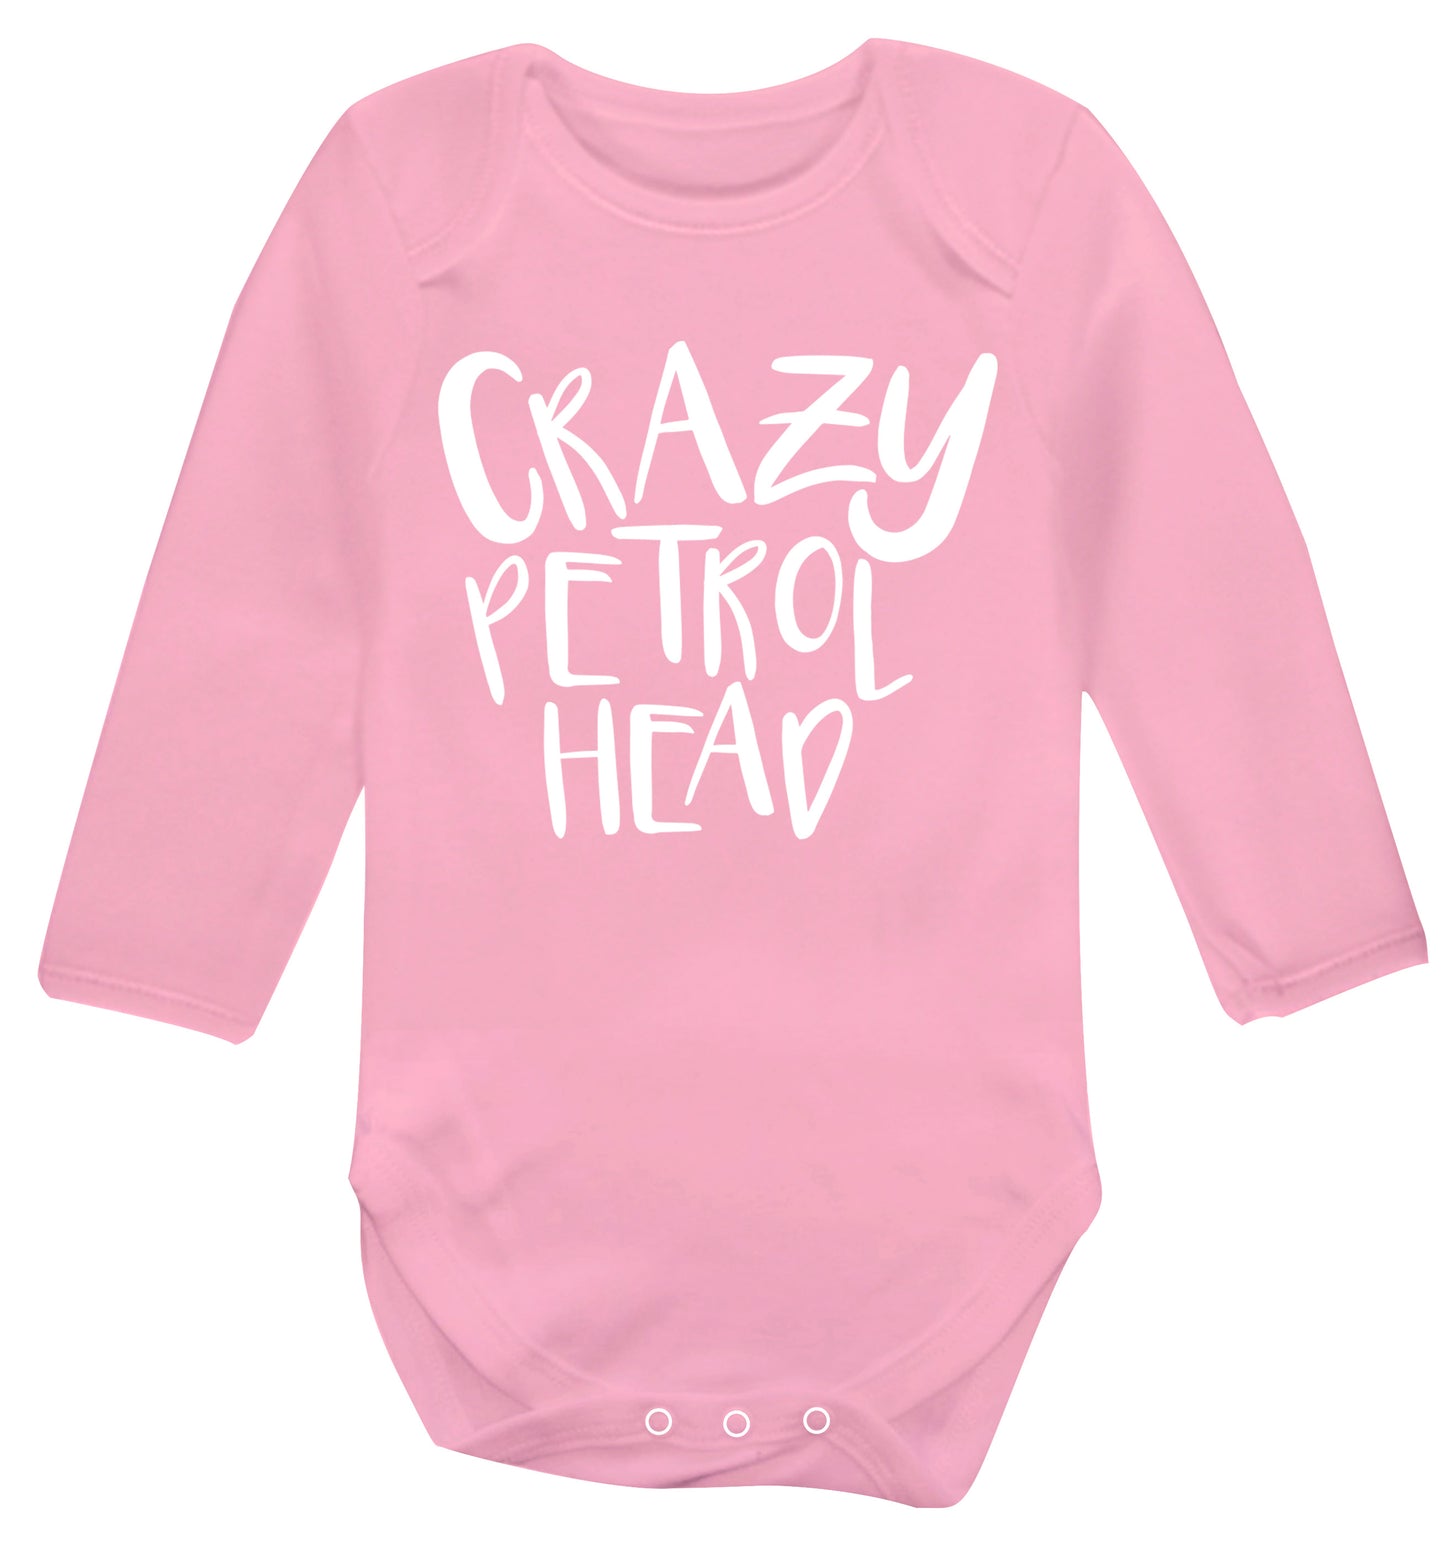 Crazy petrol head Baby Vest long sleeved pale pink 6-12 months